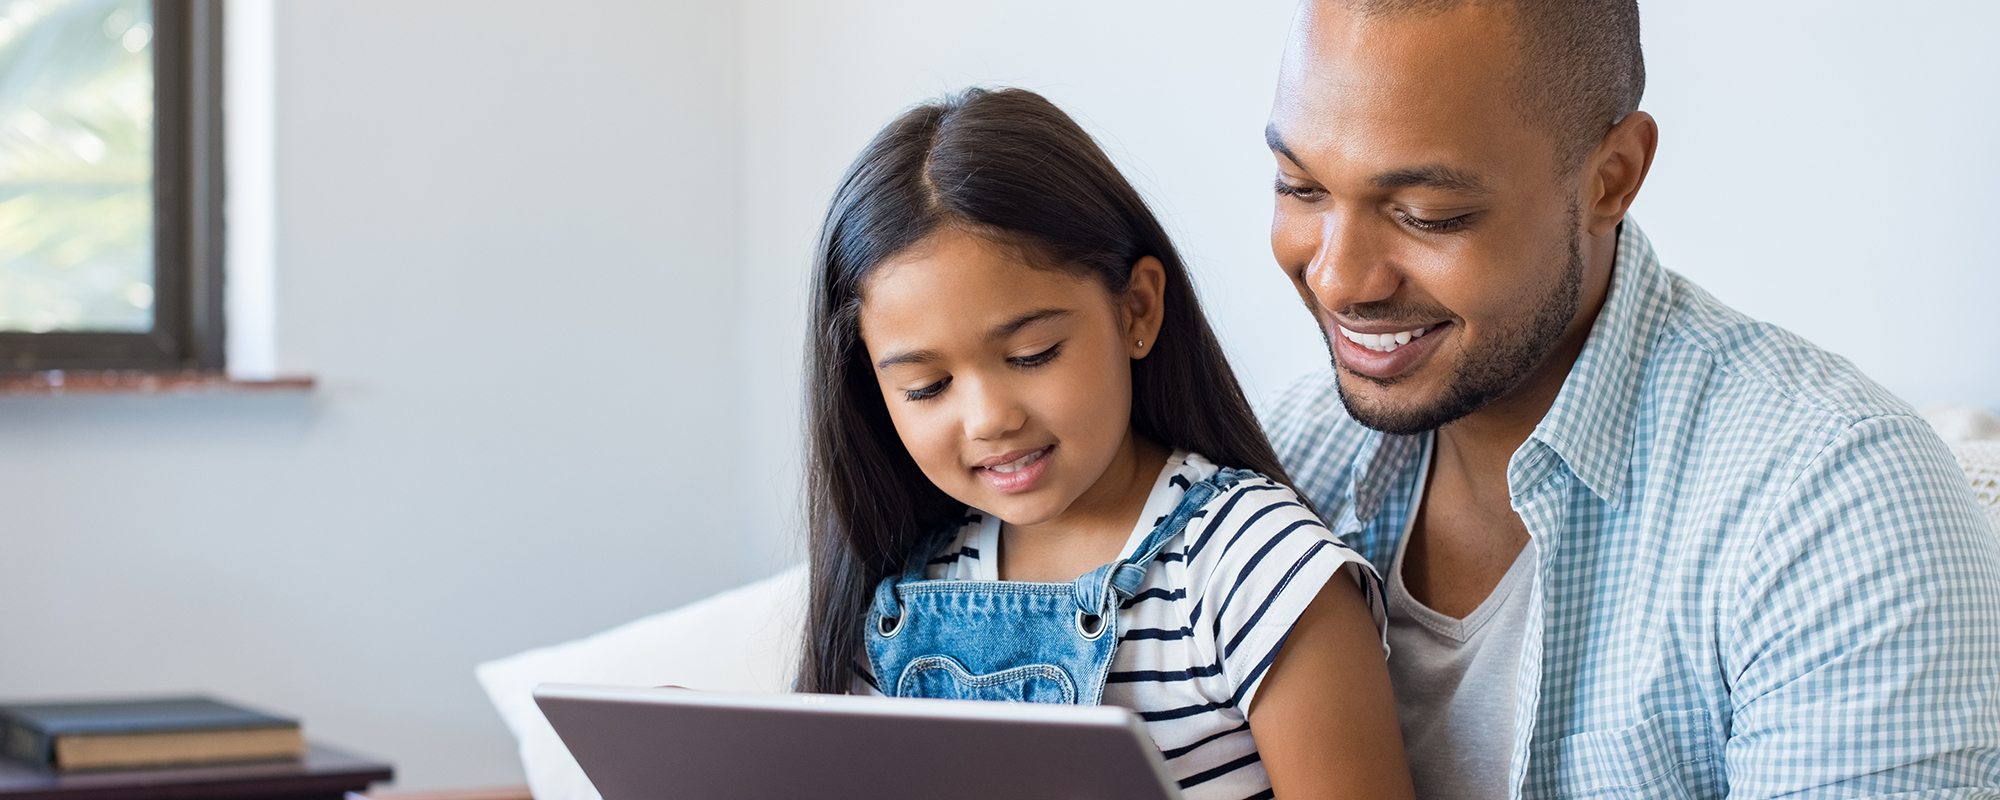 man and young girl watching a tablet together | Digital Wings blog | What is streaming